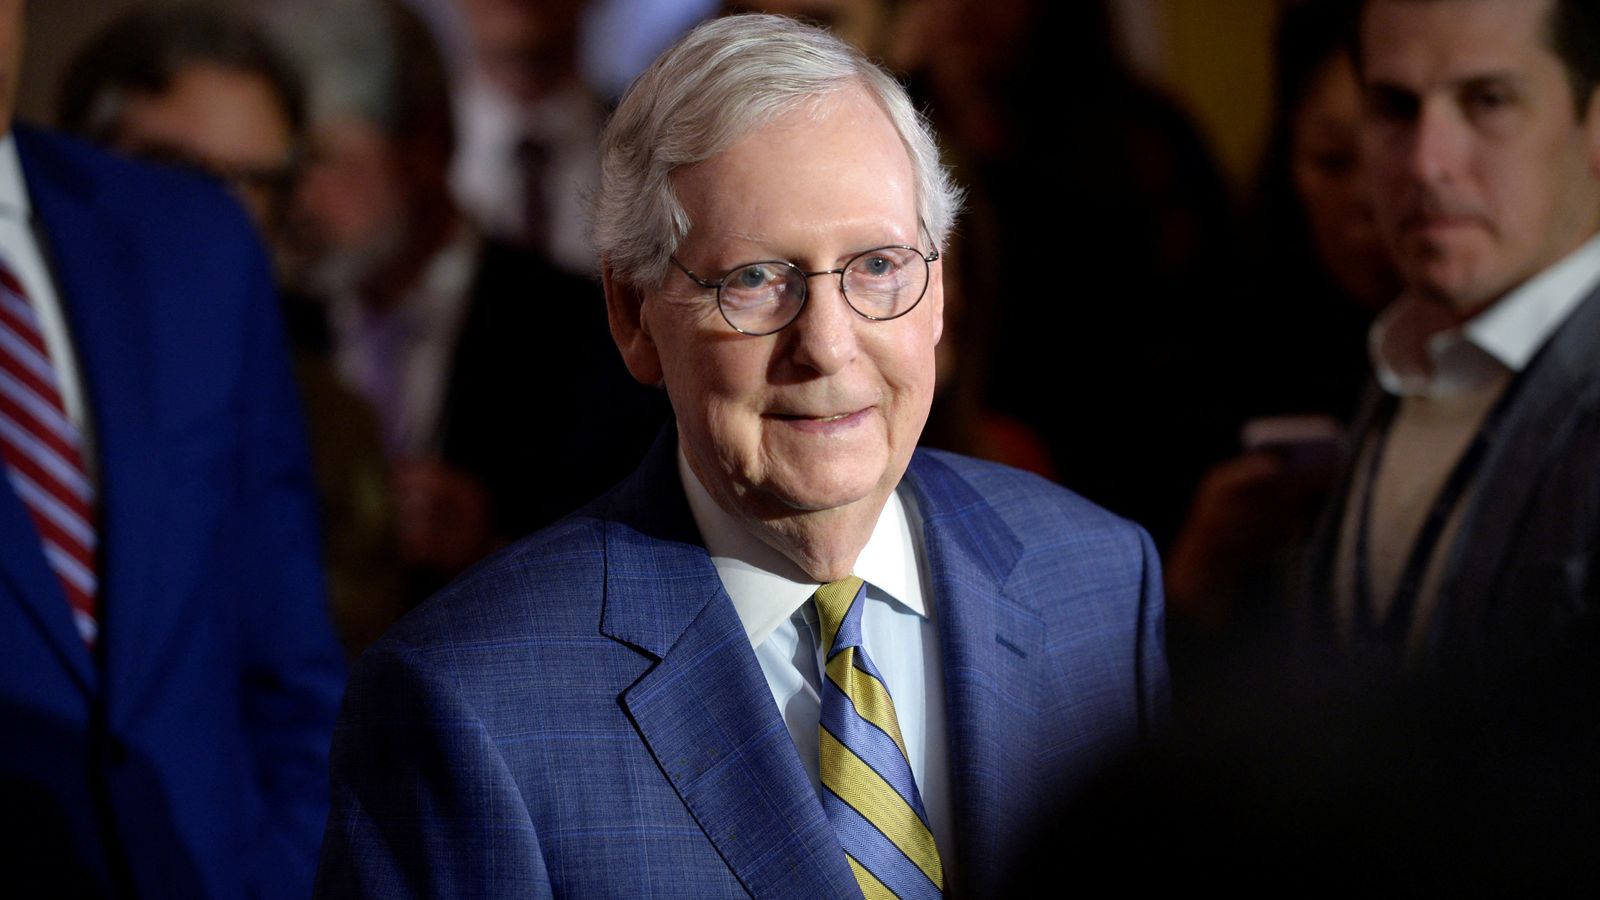 US Senate Republican leader Mitch McConnell to step down in November